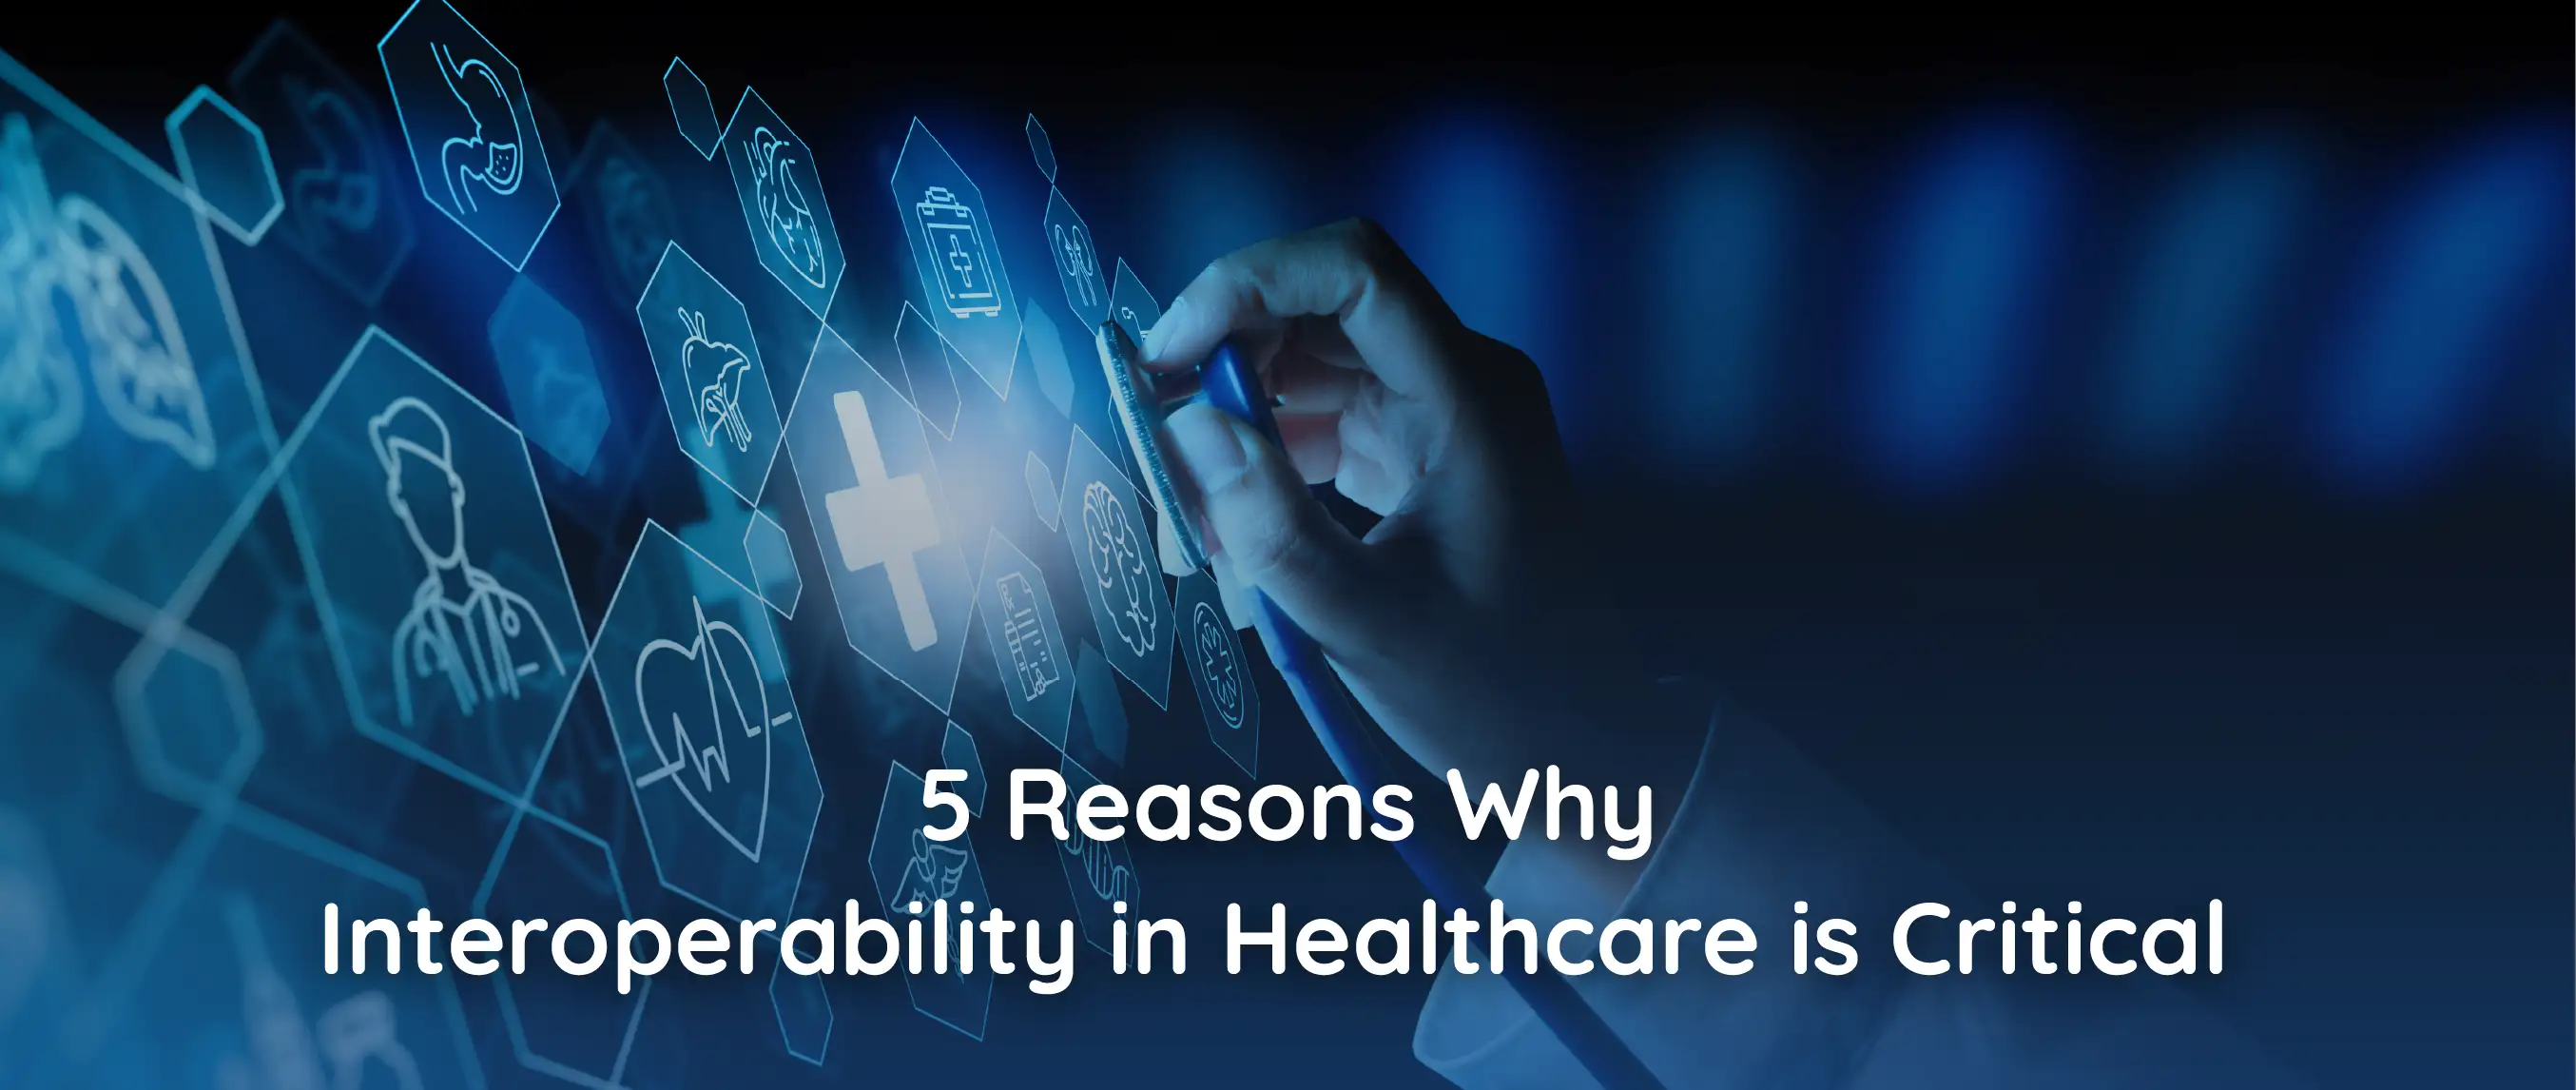 5 Reasons Why Interoperability in Healthcare is Critical